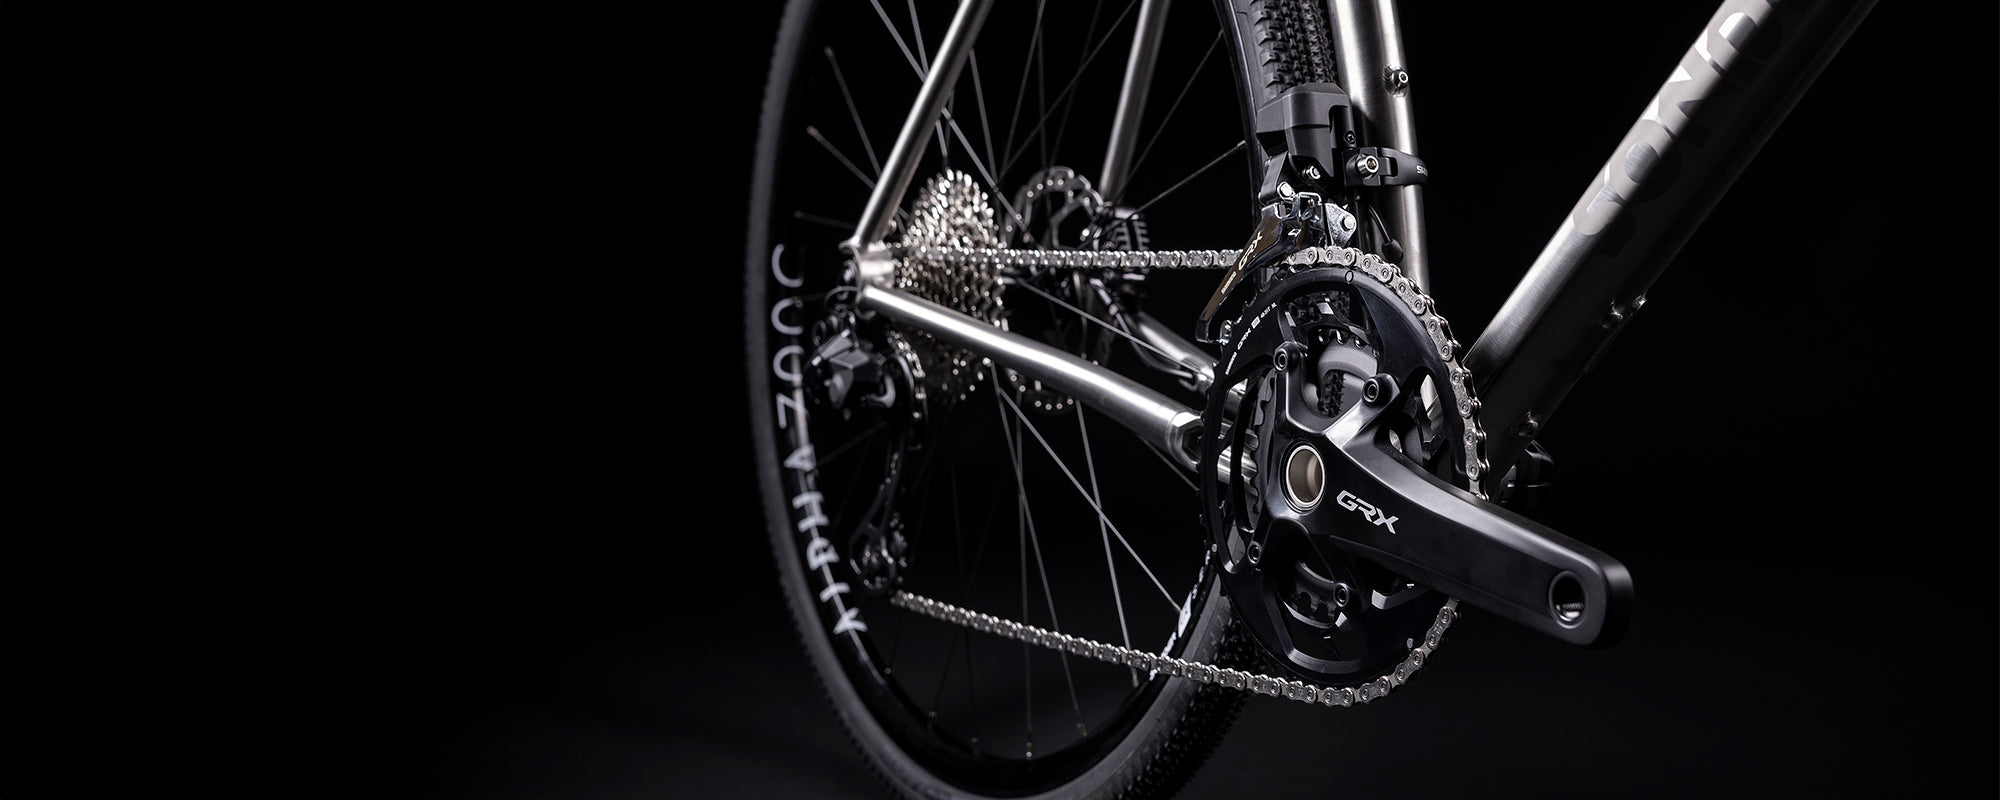 Electrify your ride with the all new Shimano GRX2 Di2 groupset